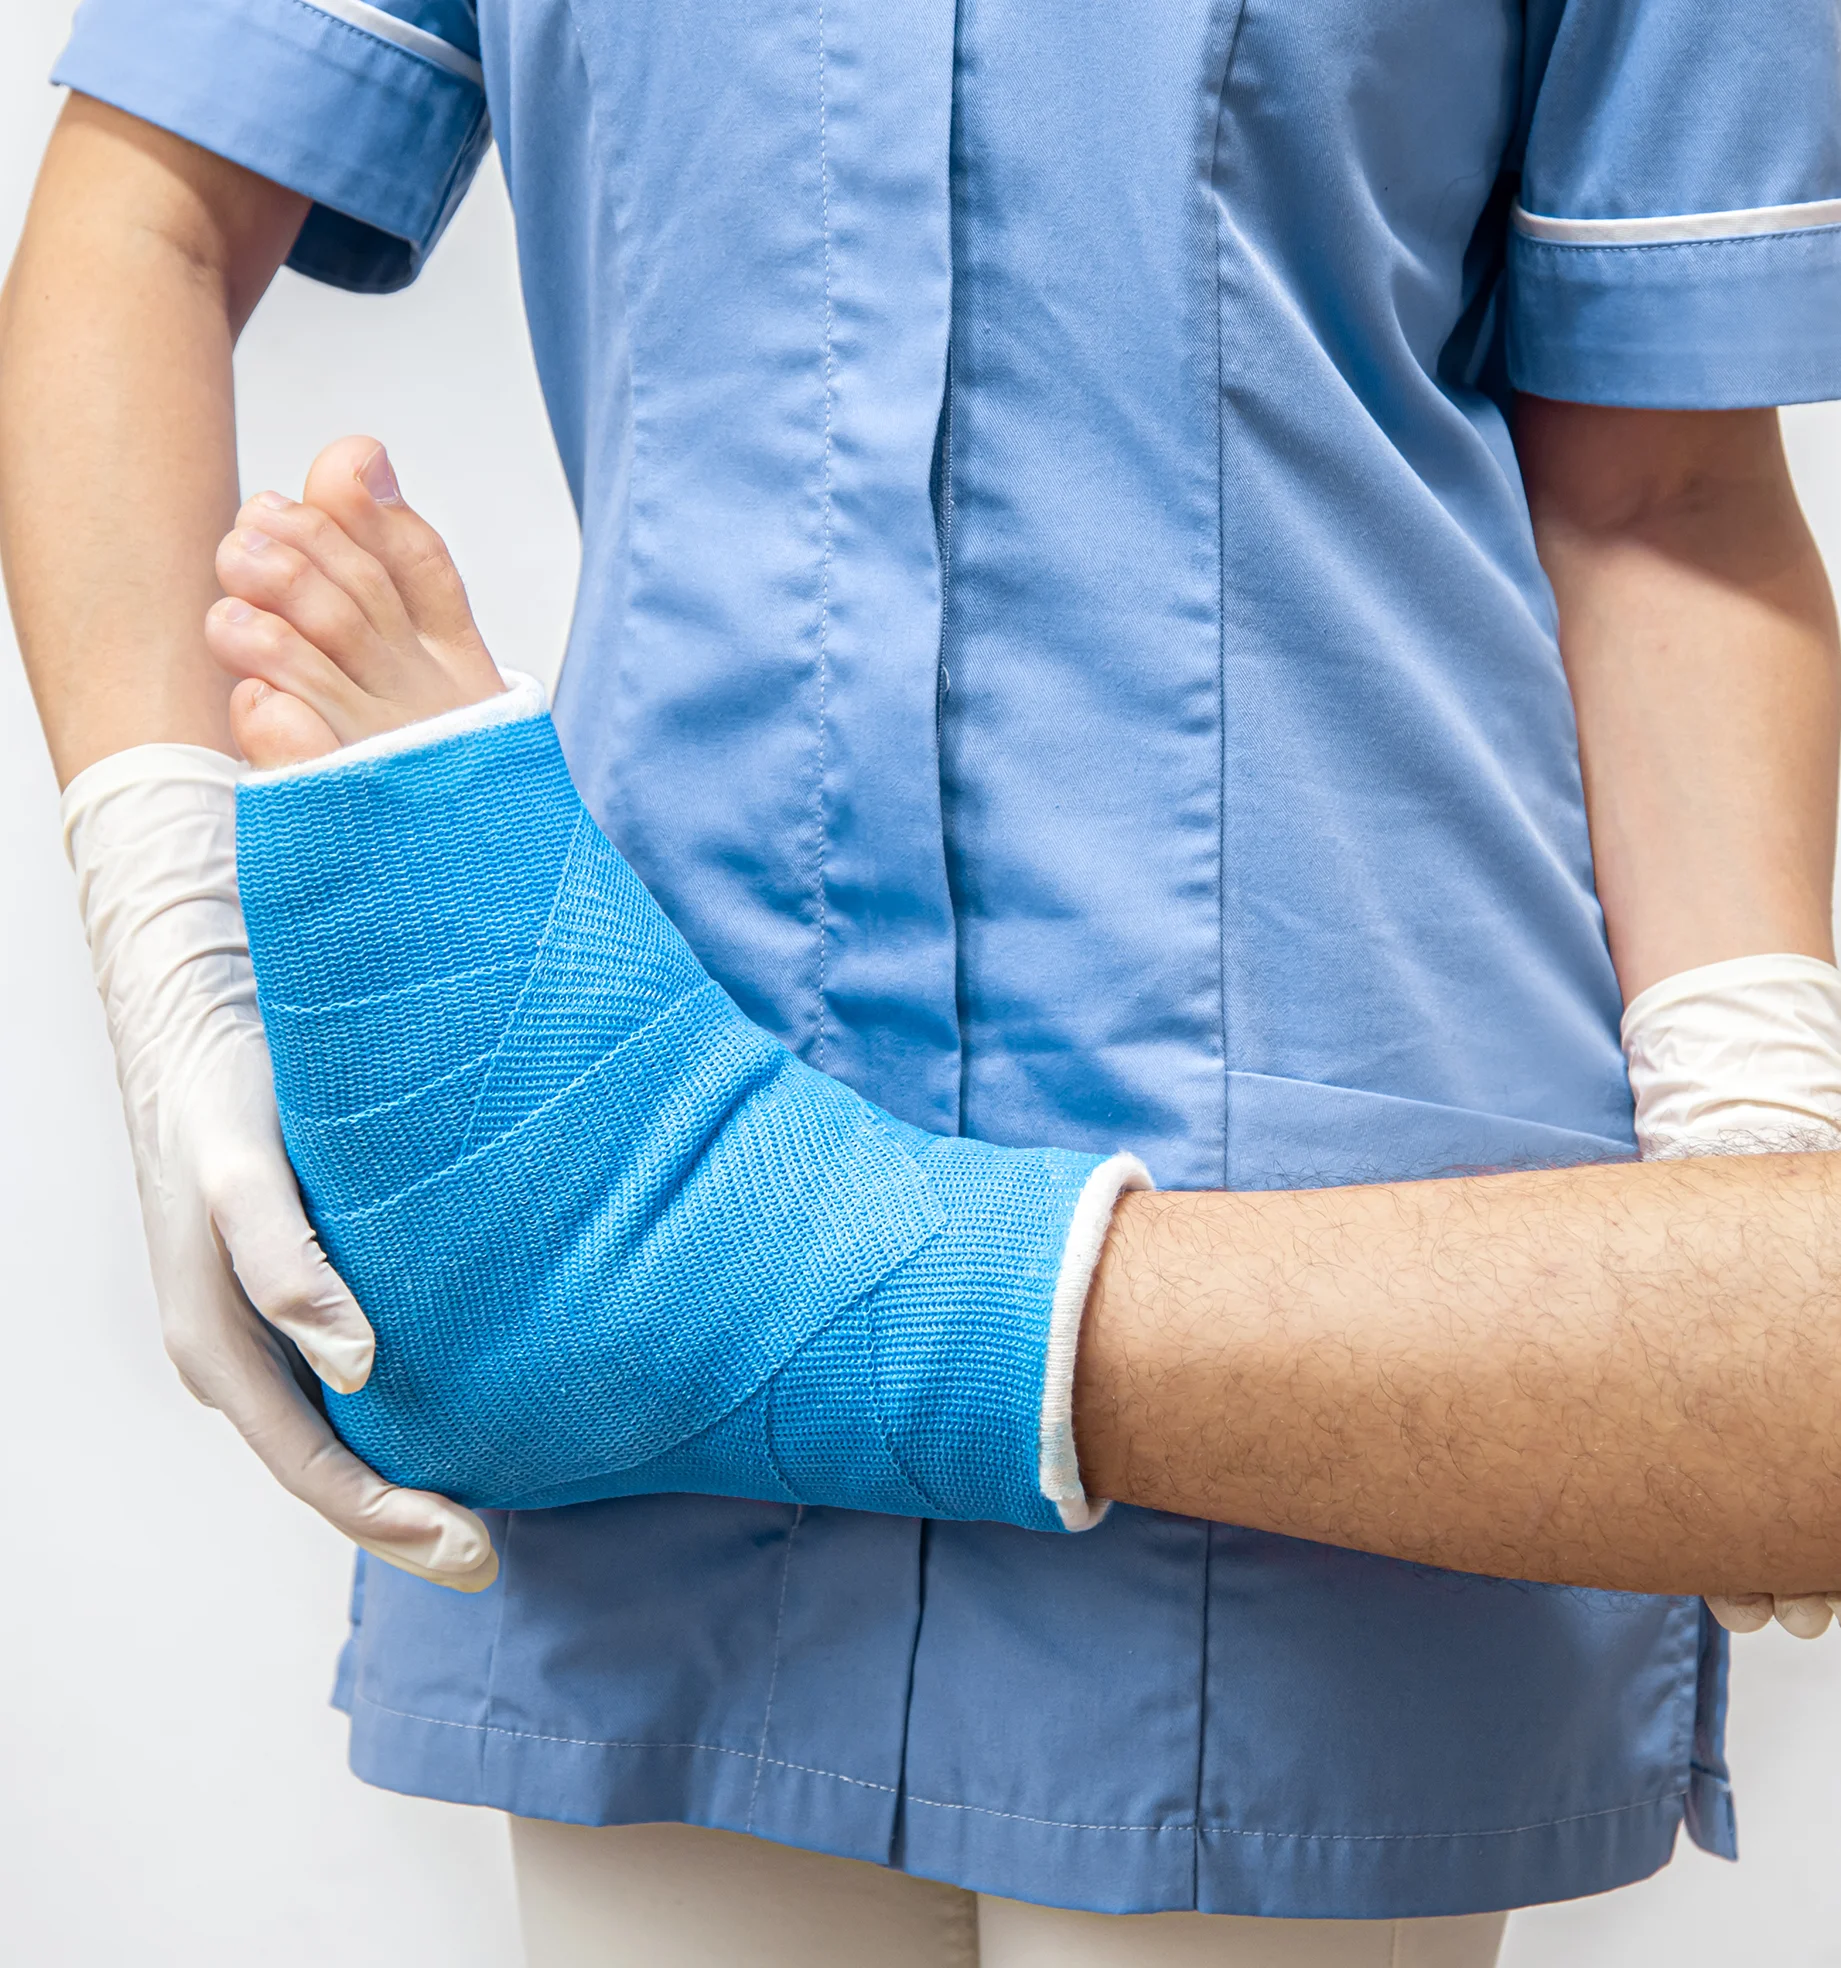 Best Fracture Reduction Treatment in Bareilly - Gangasheel Hospital